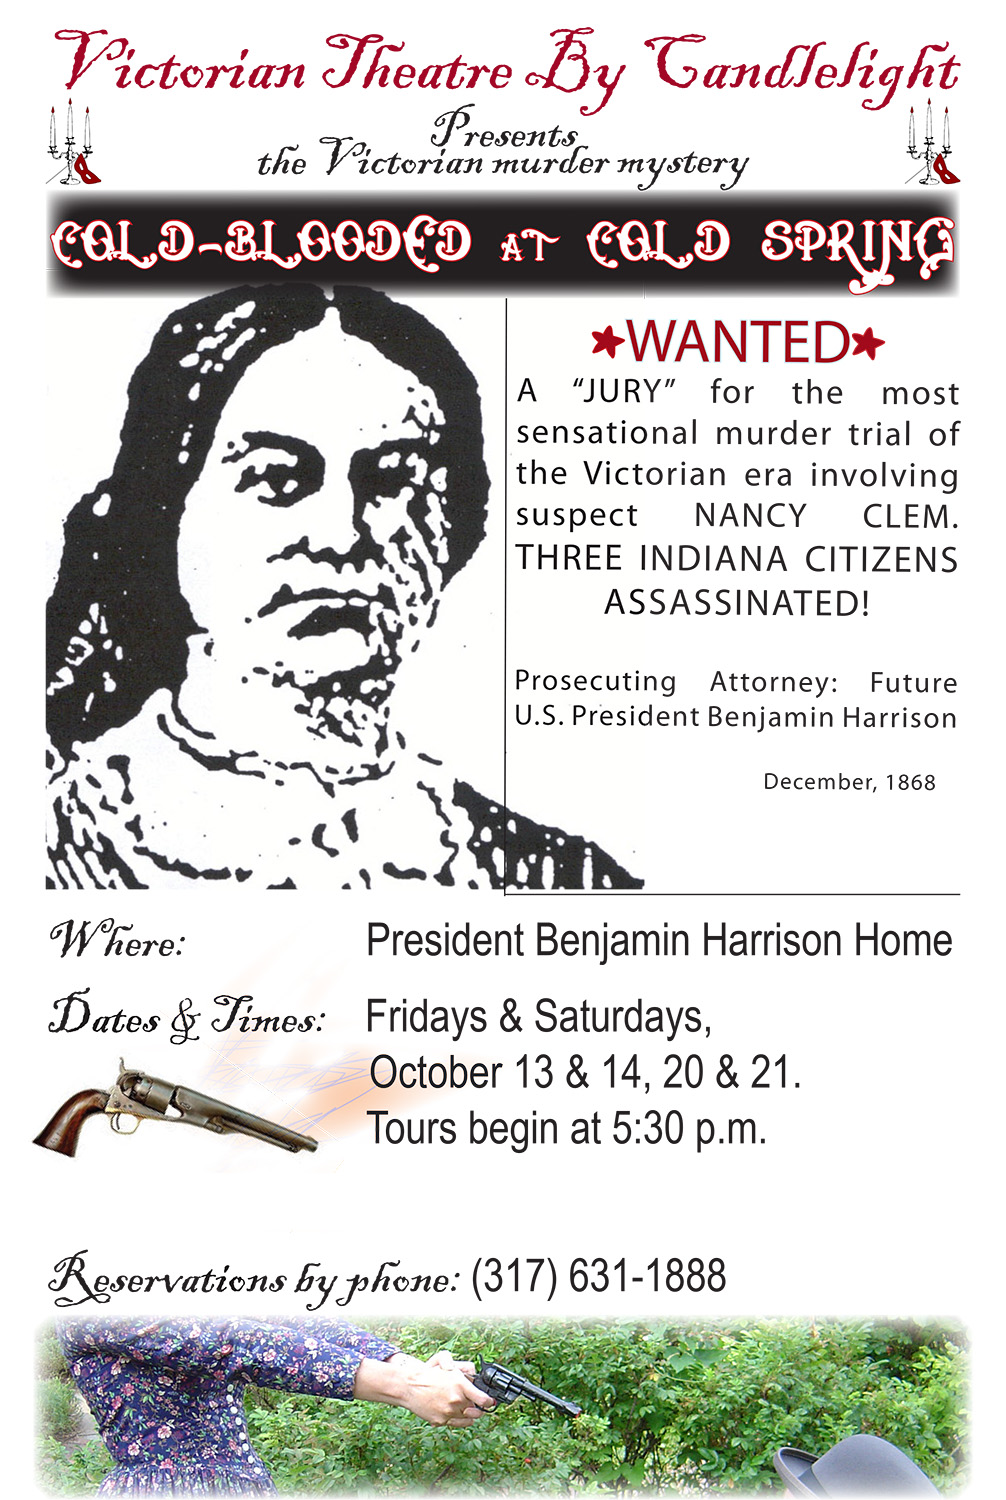 Graphic, rudimentary image of Nancy Clem, with several images of eighteen hundreds style revolvers below.. Text reads: victorian theater by candlelight presents the victorian murder mystery, Cold Blooded at Cold Spring. wanted. a jury for the most sensational murder trial of the victorian era involving suspect nancy clem. three indiana citizens assassinated. prosecuting attorney: future u.s. president benajmin harrison. december, 1868. president benjamin harrison home. fridays and saturdays, october 13 and 14, 20 and 21. tours begin at five thirty p.m. reservations by phone, 317 631 1888